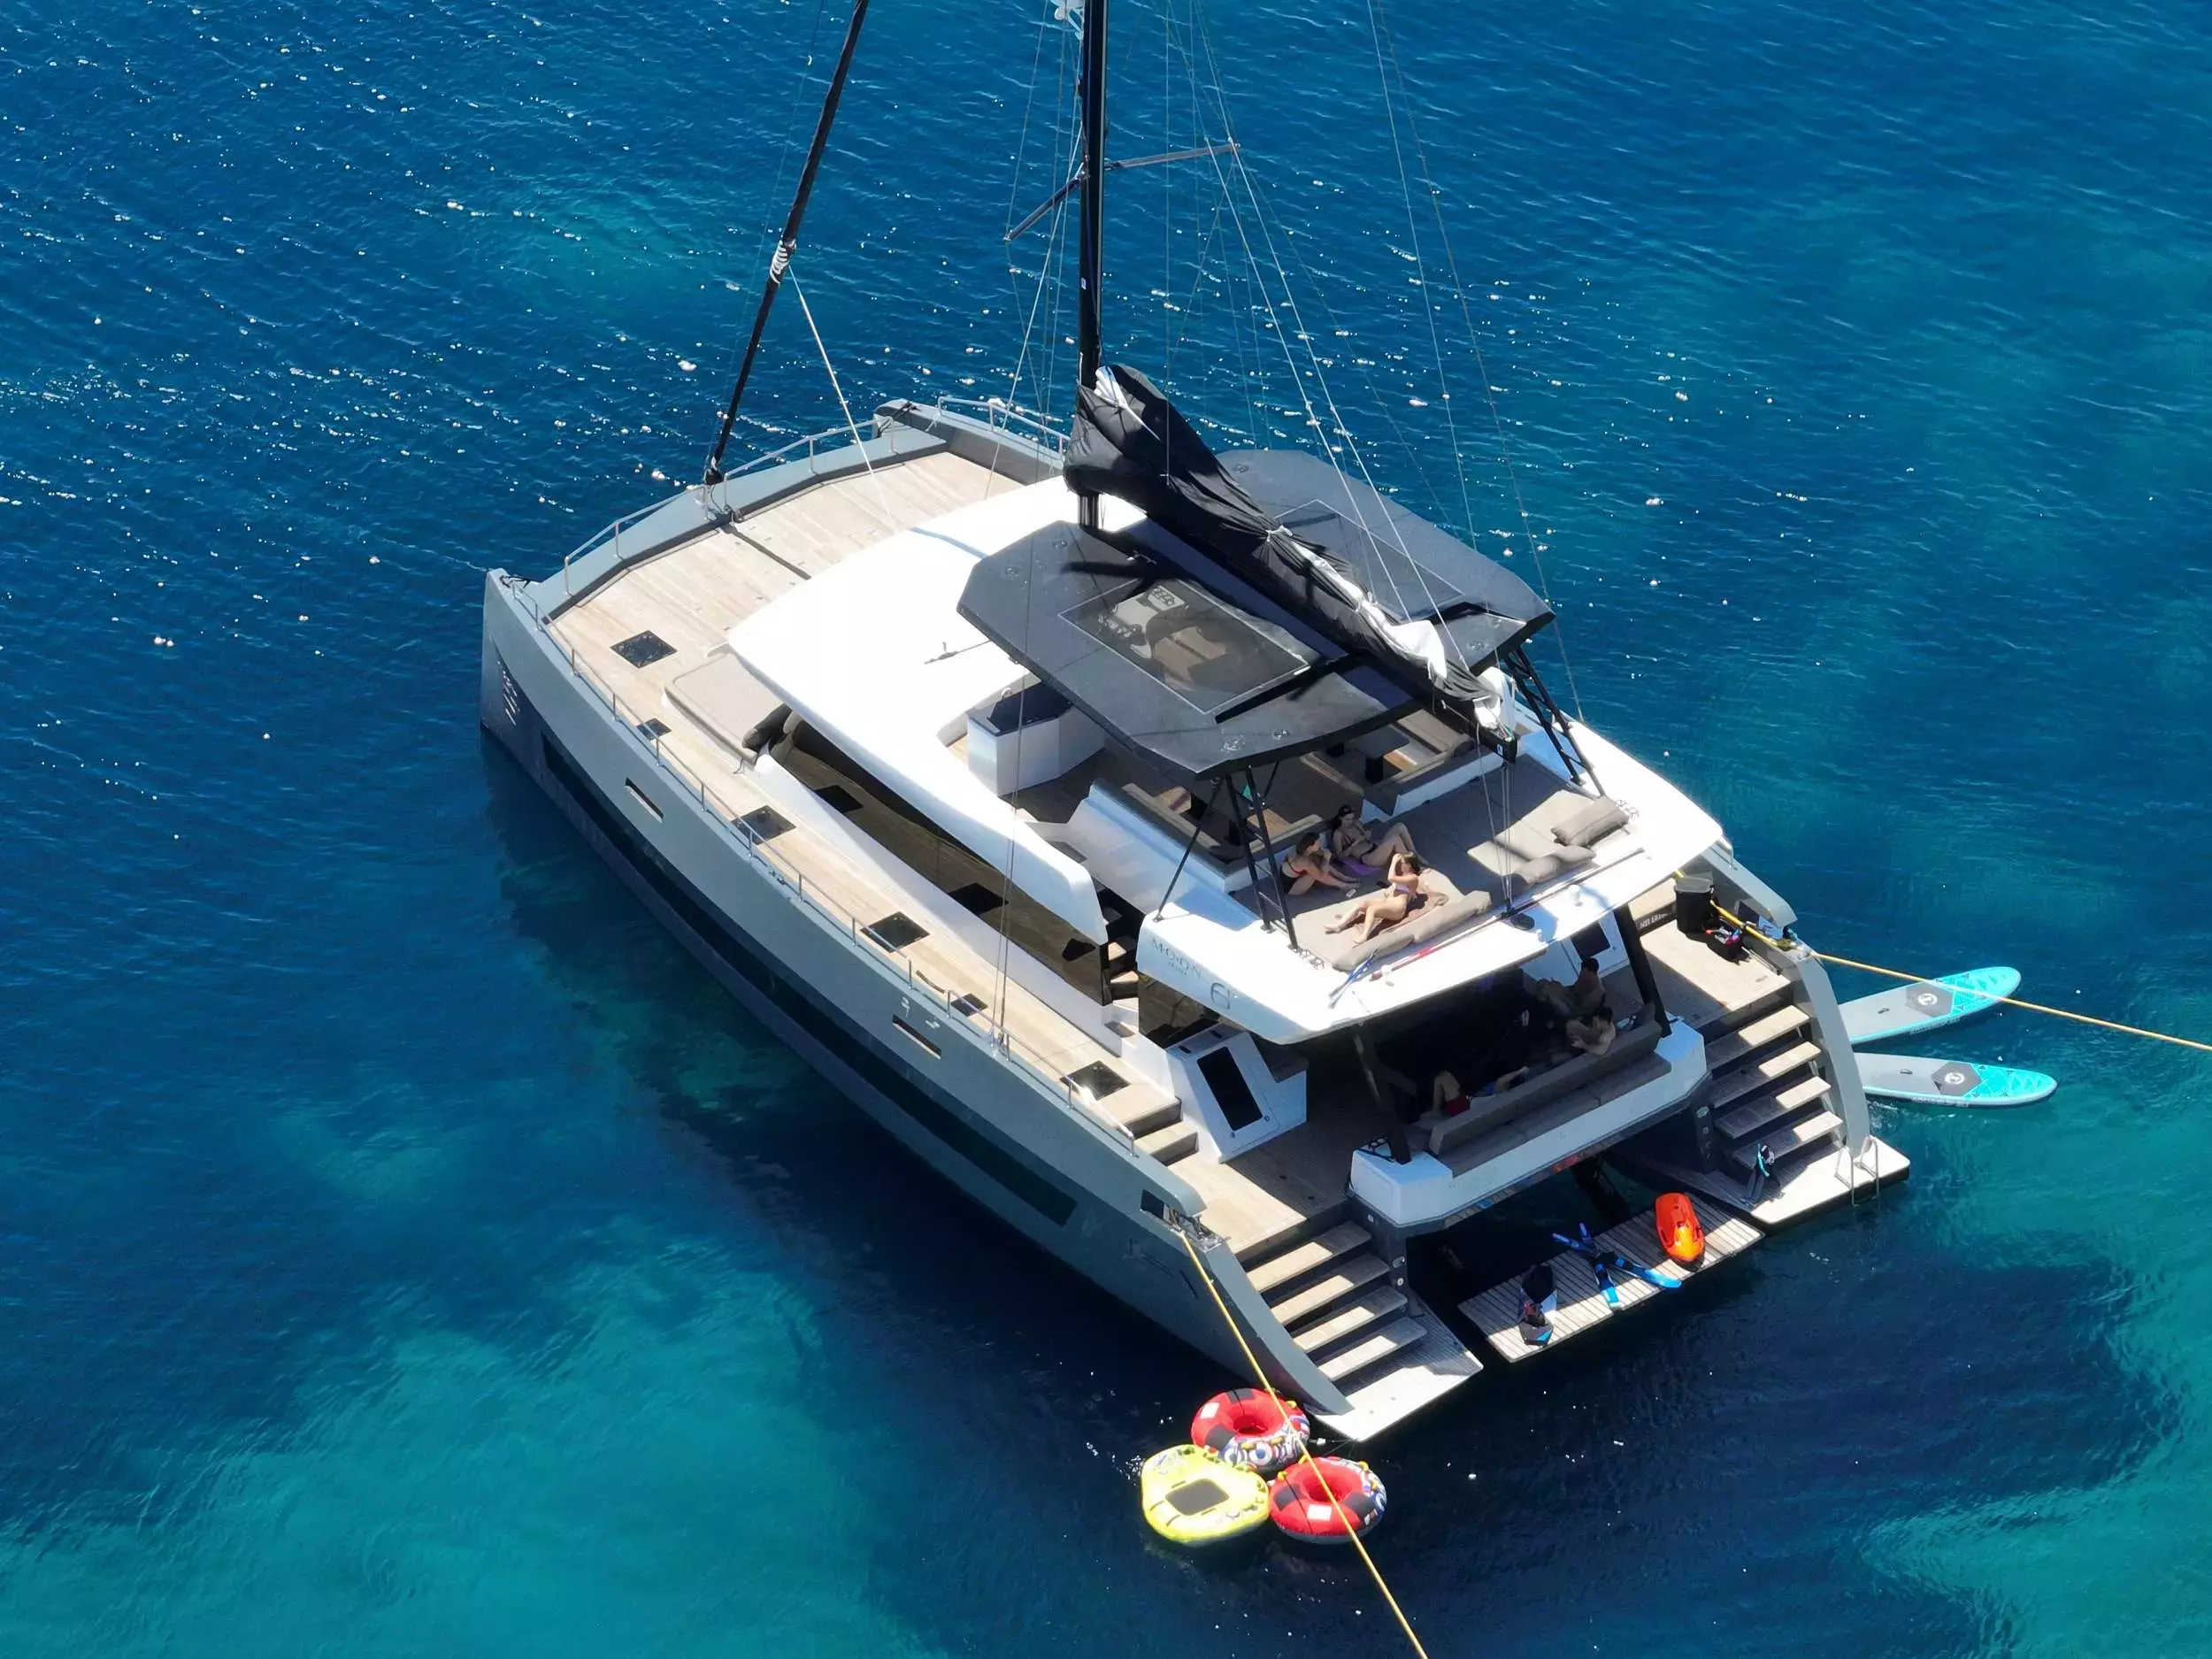 Moonlight by Moon - Top rates for a Charter of a private Luxury Catamaran in Greece